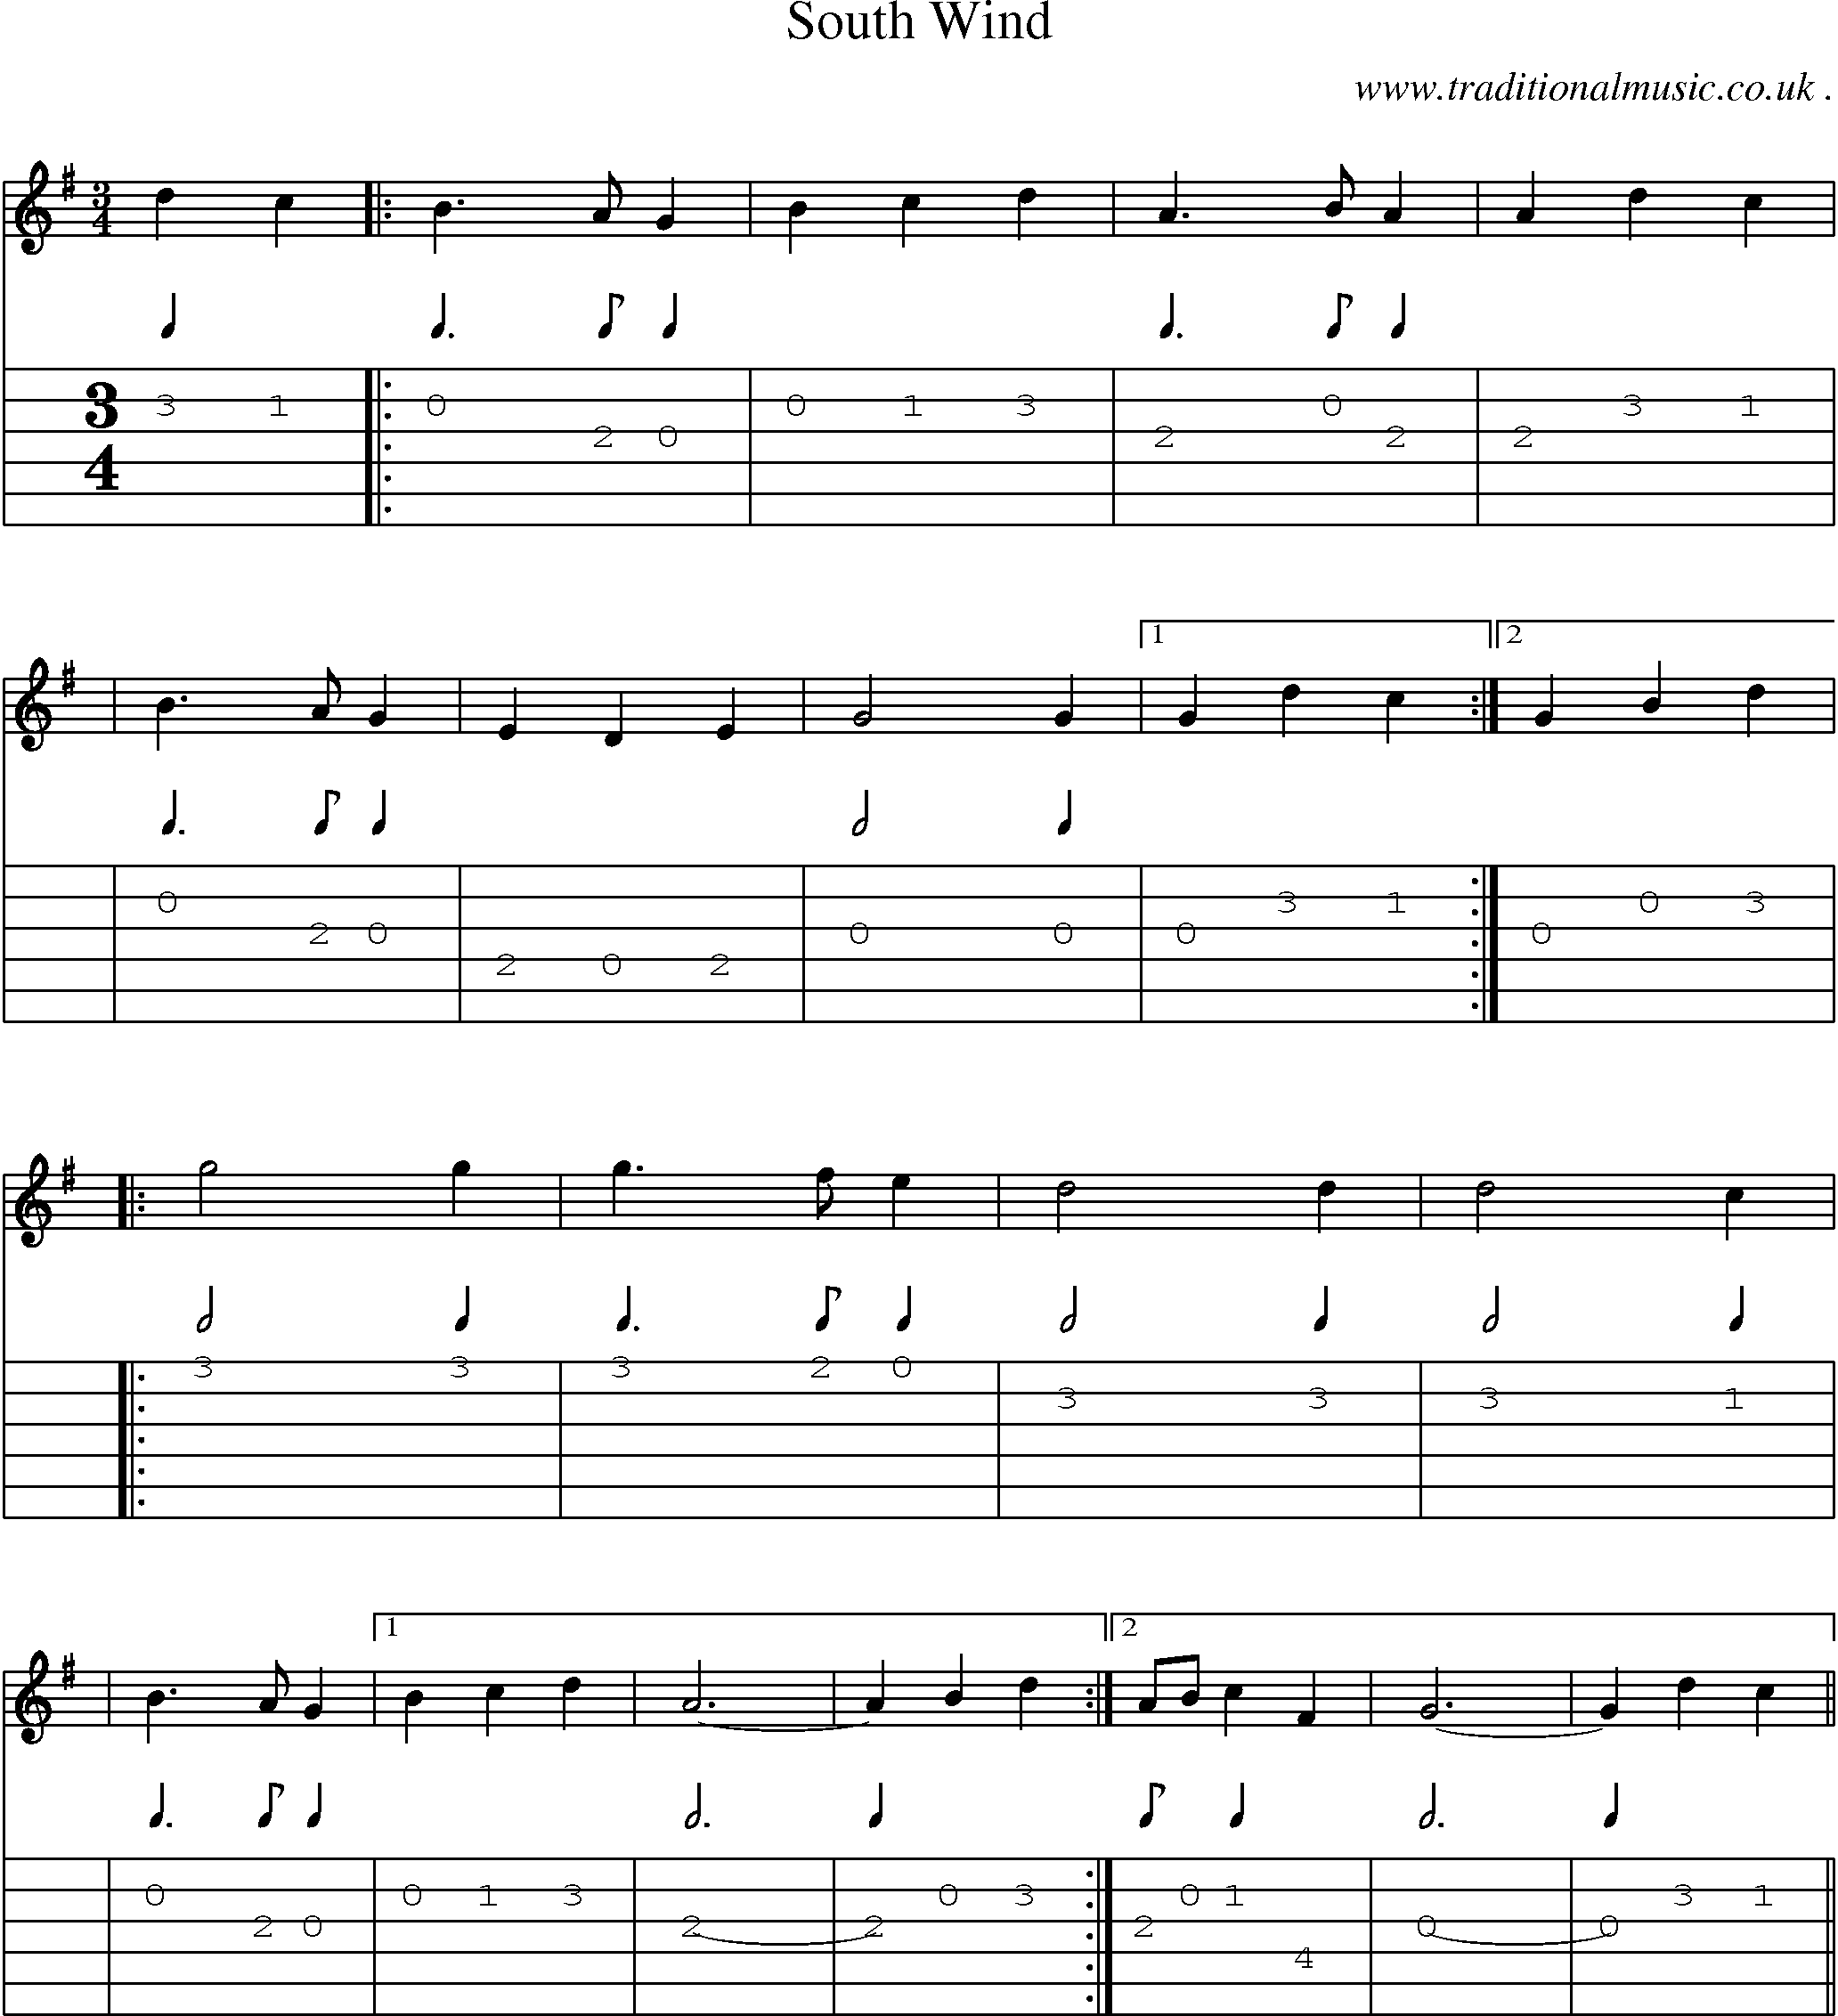 Sheet-Music and Guitar Tabs for South Wind